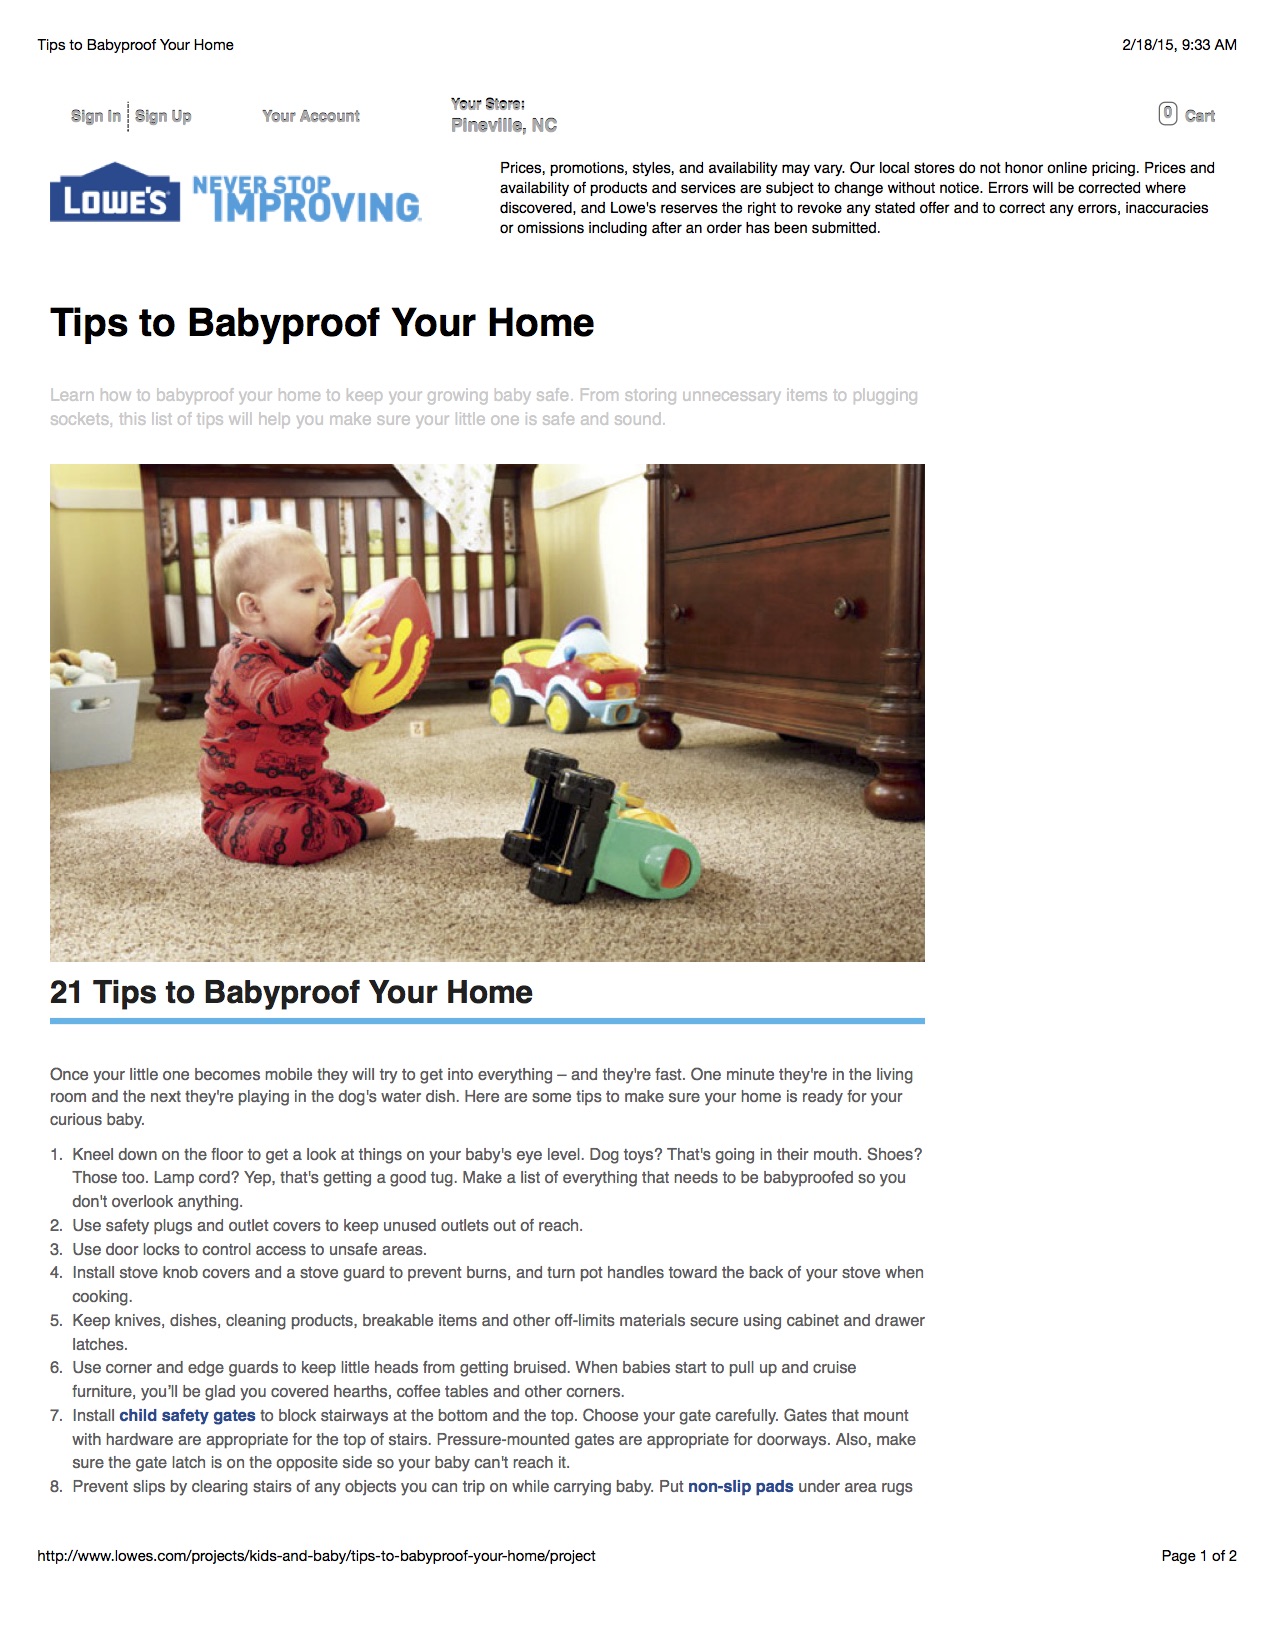 Tips to Babyproof Your Home_1.jpg